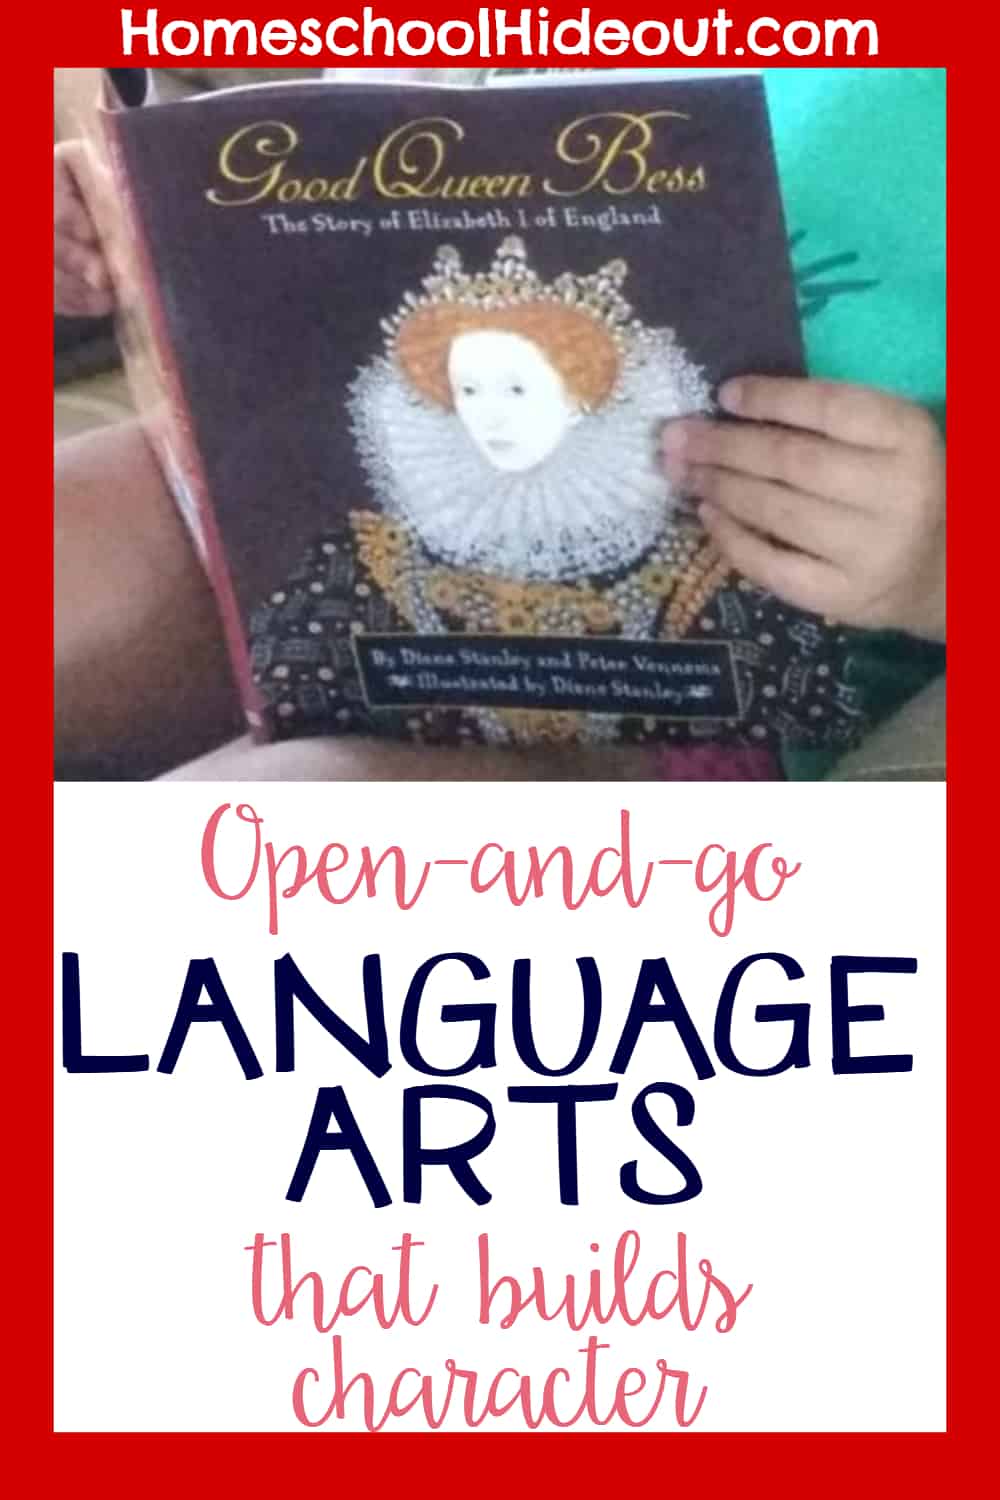 Pathways language arts is just what we've been looking for! Easy to use and not a bore. Can't ask for much more in an all-in-one language arts curriculum!